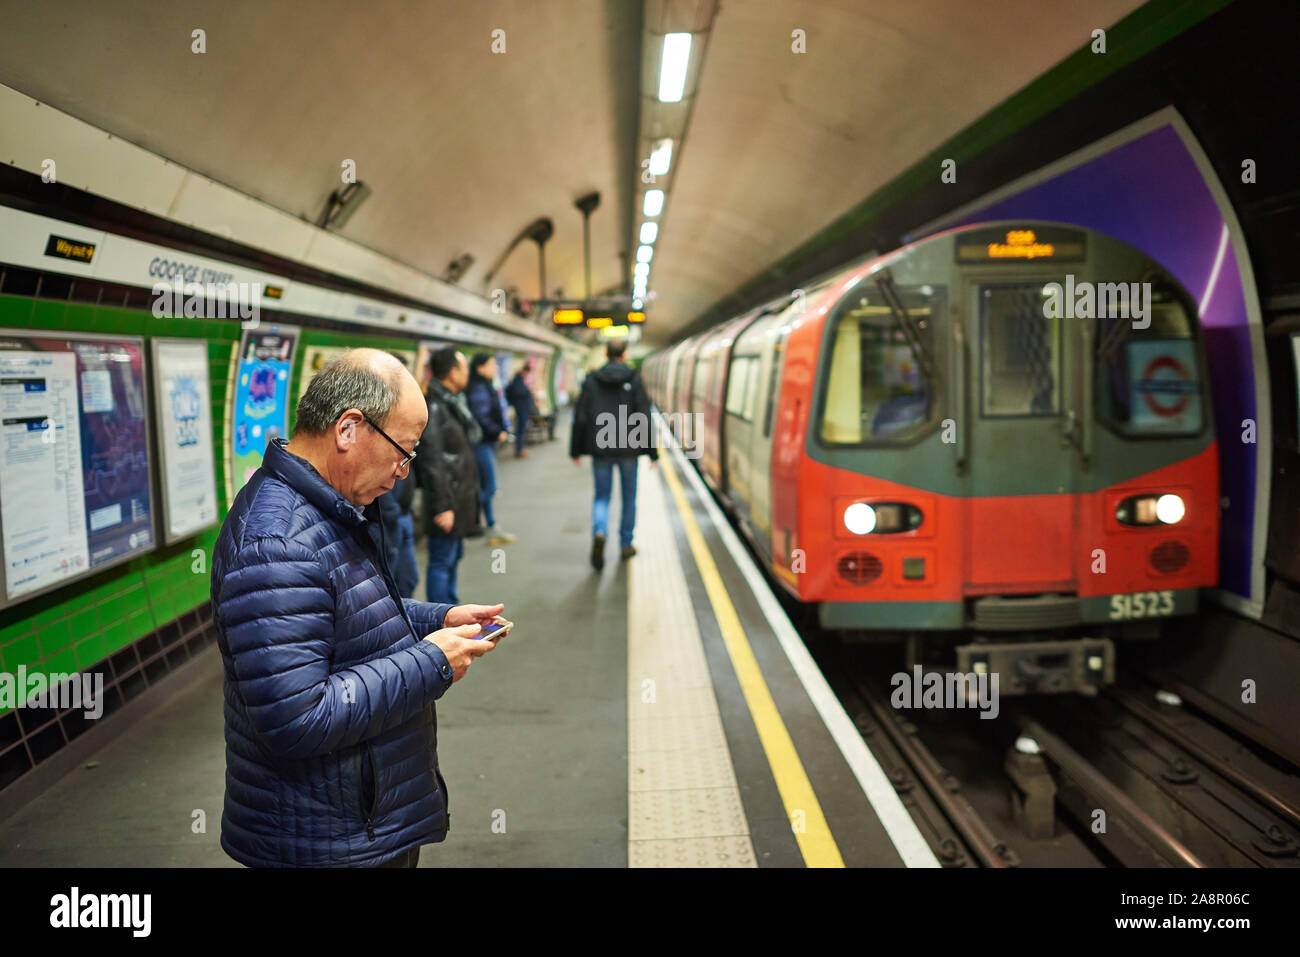 An elderly Asian gentleman waiting for a tube train on the London Underground. Stock Photo